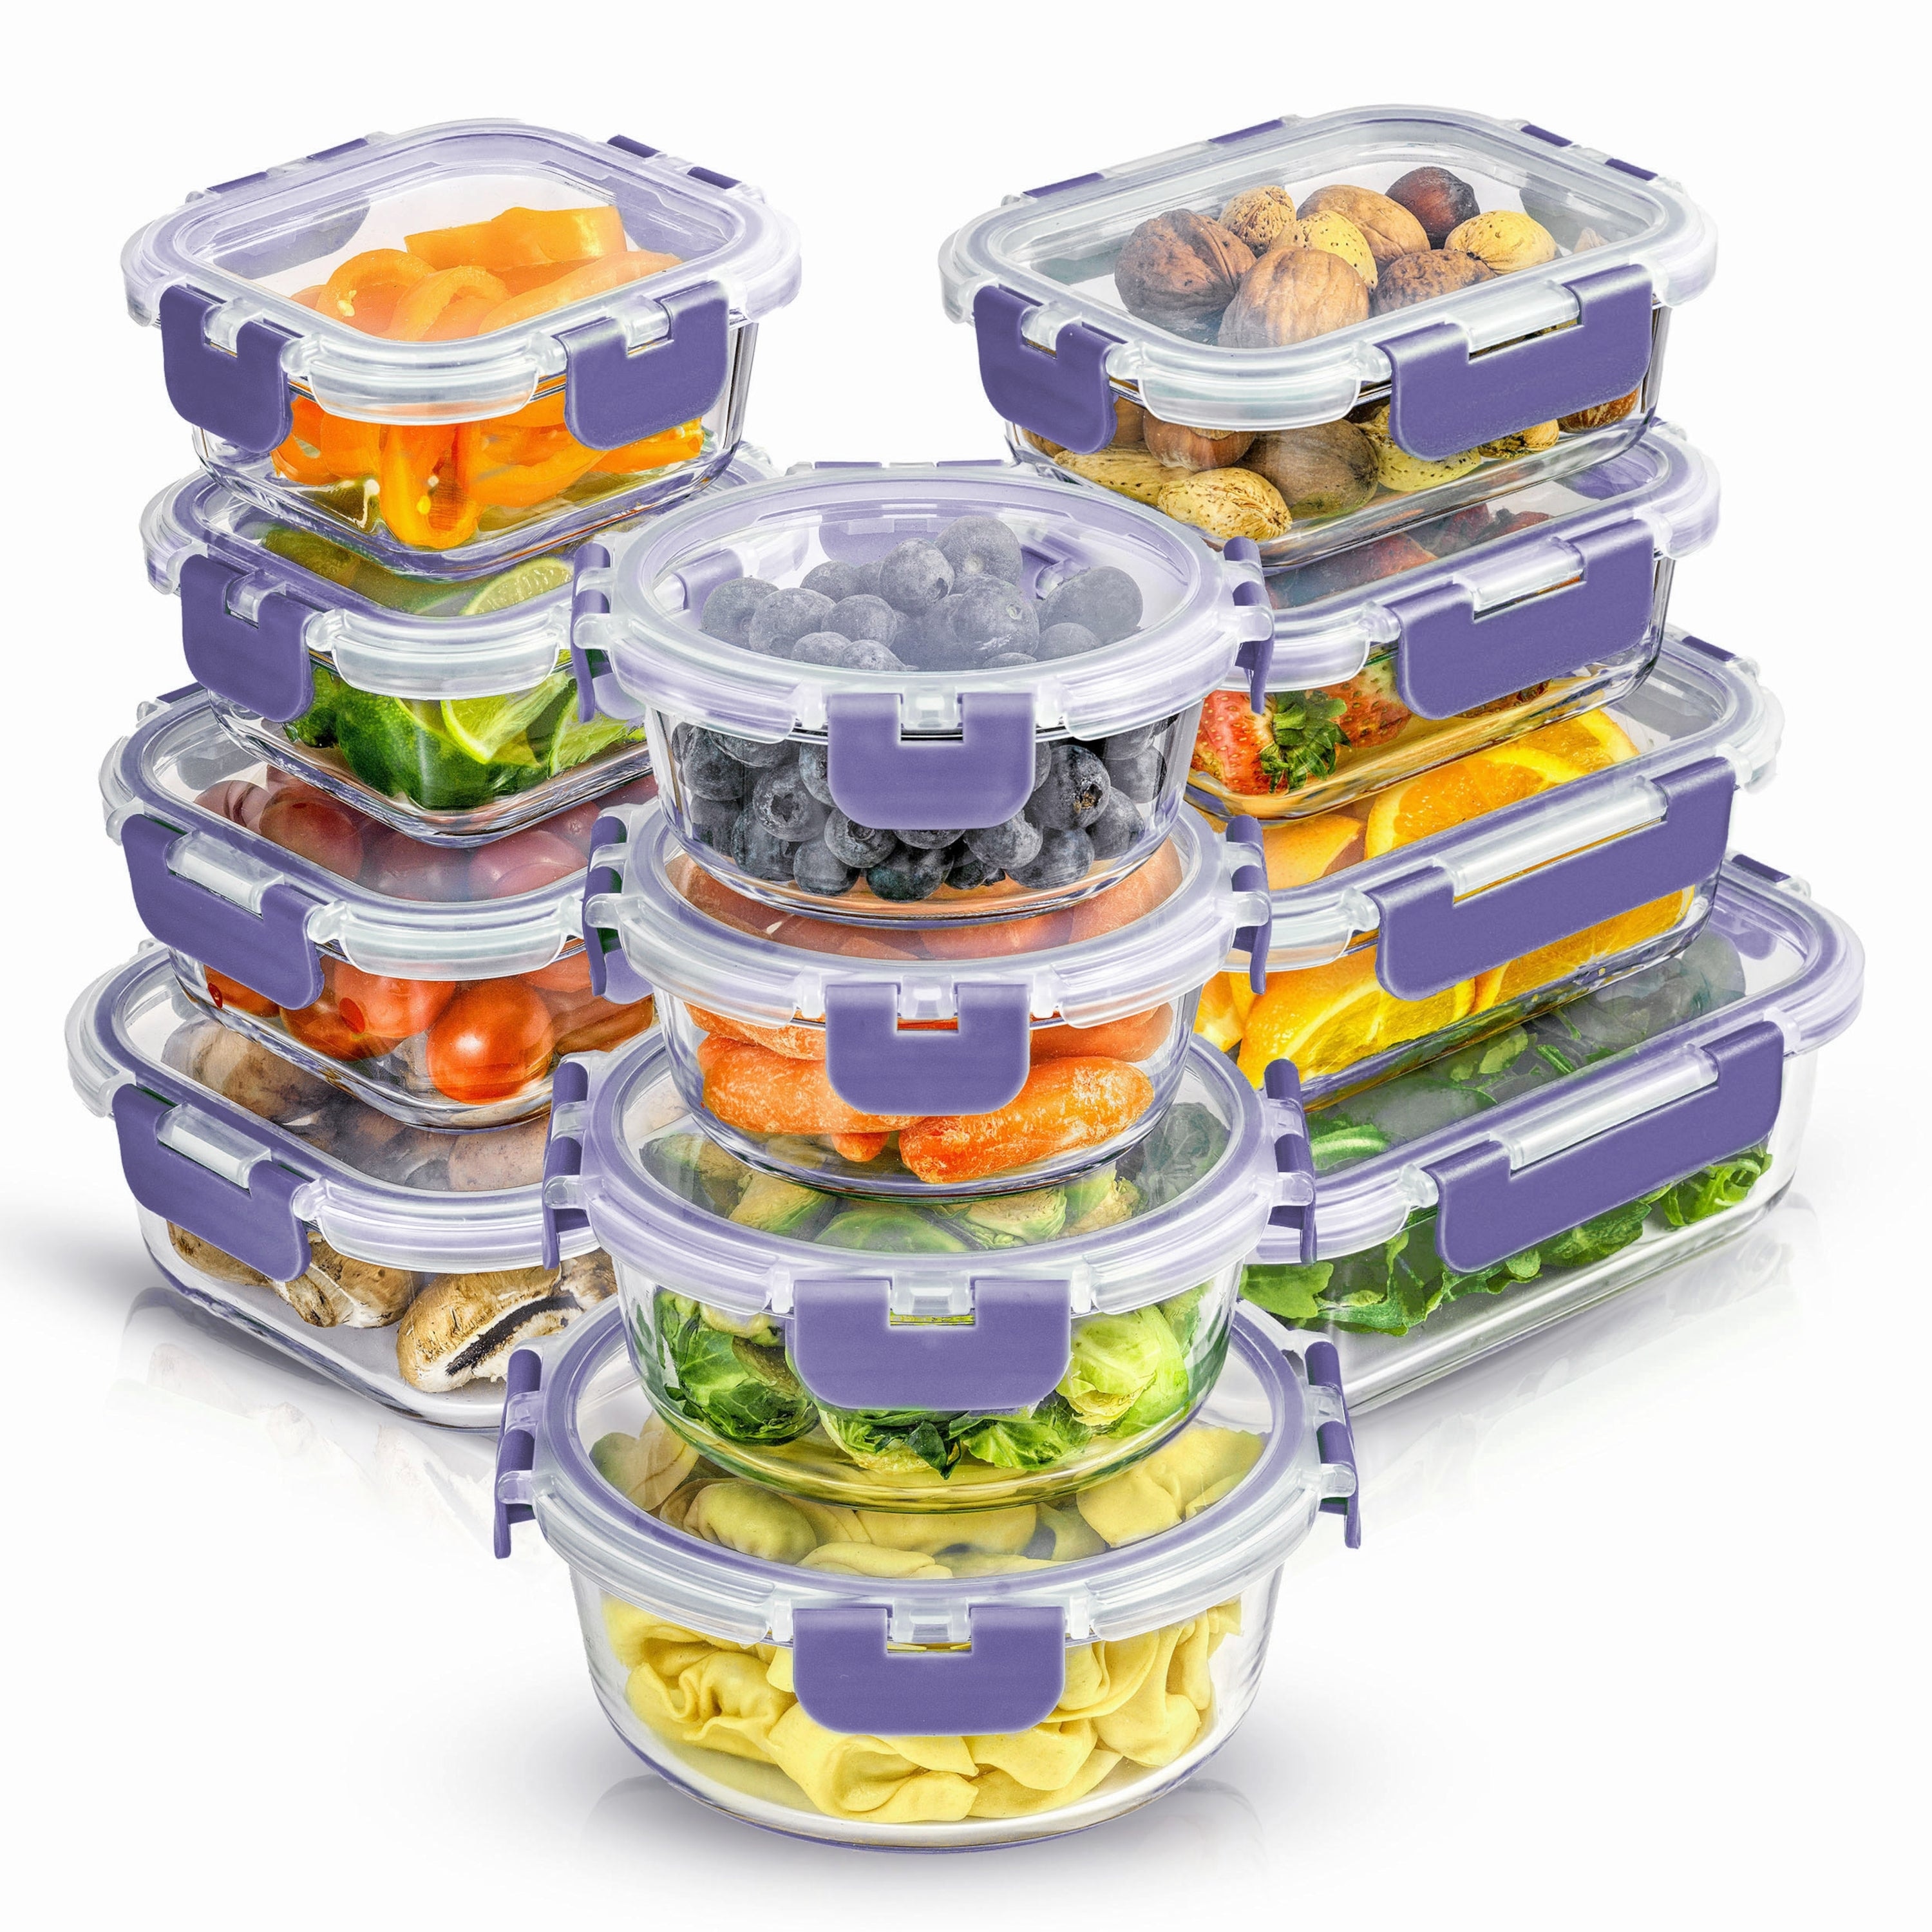 https://ak1.ostkcdn.com/images/products/is/images/direct/a19665c6aad759966192330d22d6aab12b873469/JoyFul-24-Piece-Glass-Food-Storage-Containers-Set-with-Airtight-Lids.jpg